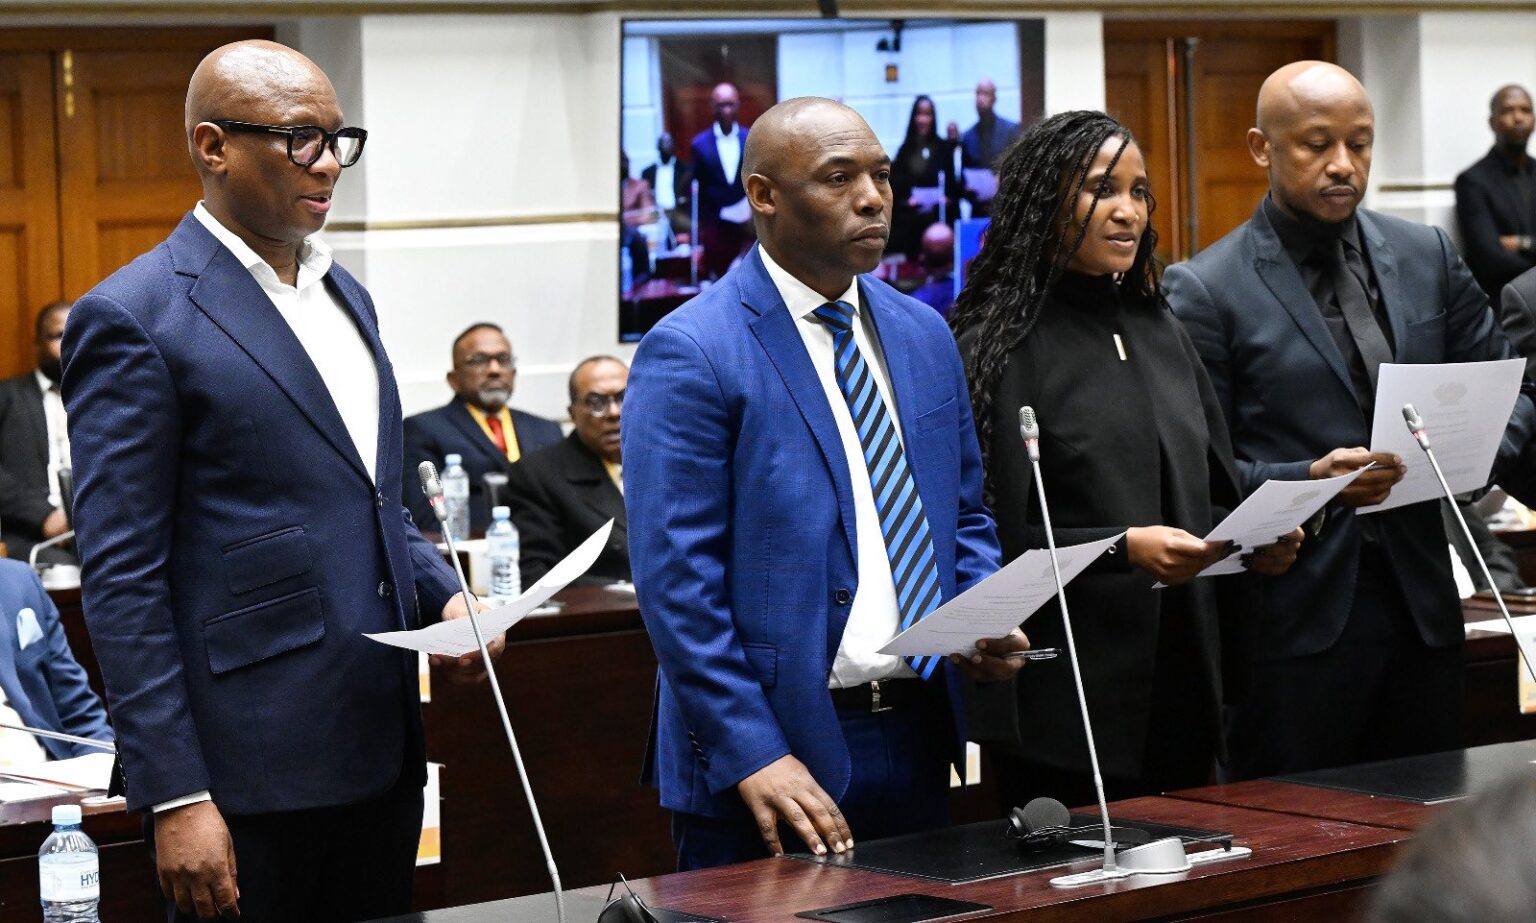 Corruption-accused former minister of Sport, Arts and Culture Zizi Kodwa being sworn in alongside MK Party members in Cape Town on Tuesday, 25 June.